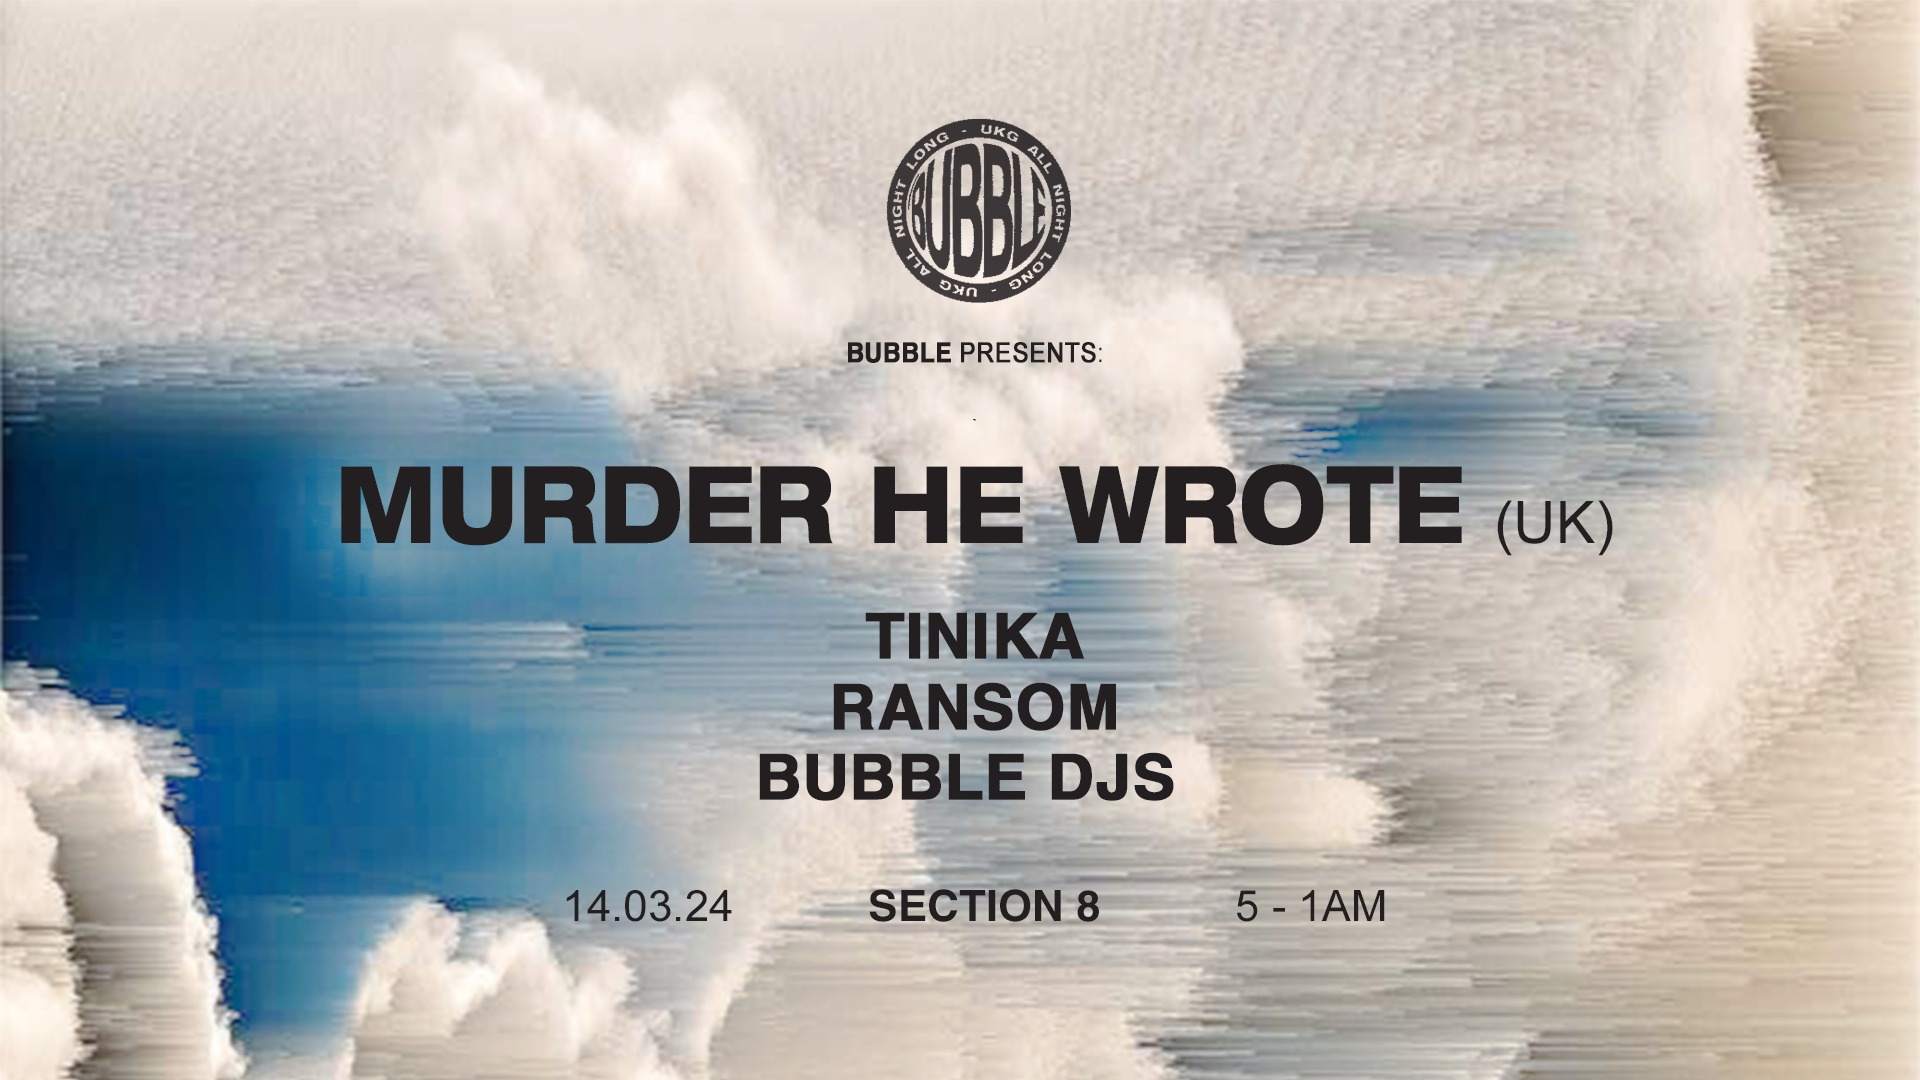 Murder He Wrote at SECTION 8 - フライヤー表